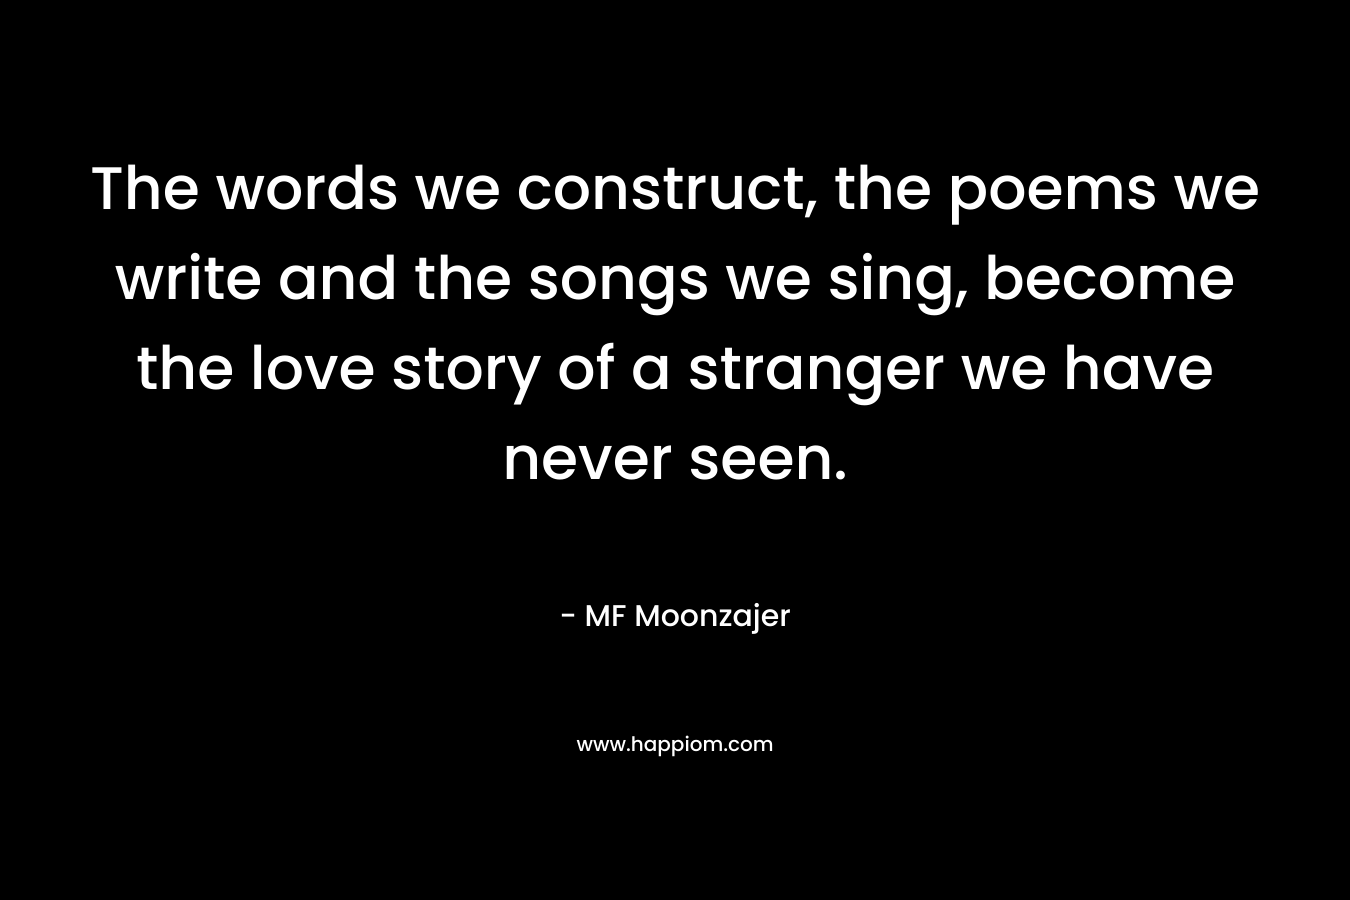 The words we construct, the poems we write and the songs we sing, become the love story of a stranger we have never seen.